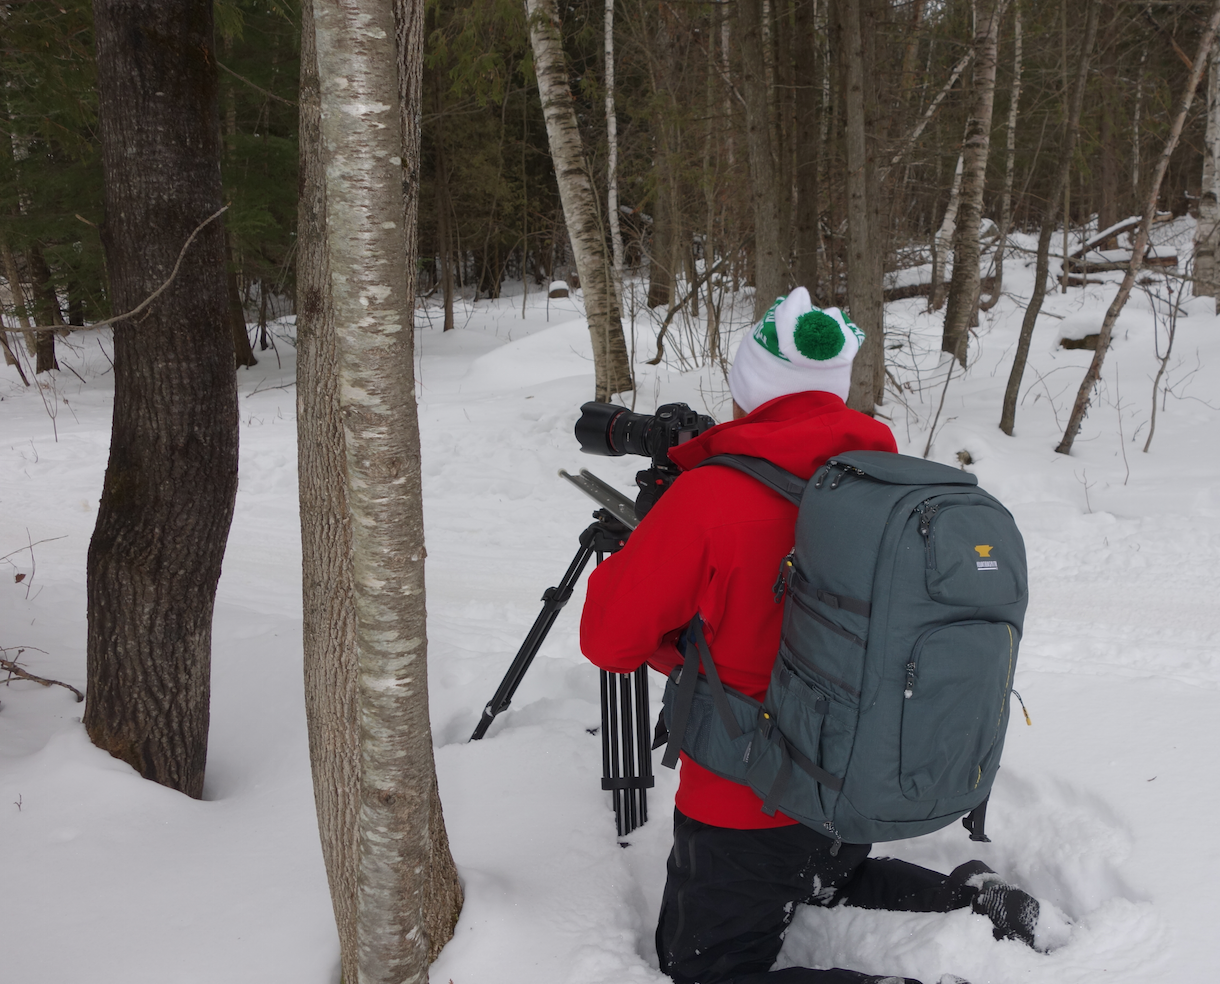 Evan Kay, Ibex In-house videographer shooting some Fat Biking in Barre, VT in the snow with his Mountainsmith Parallax